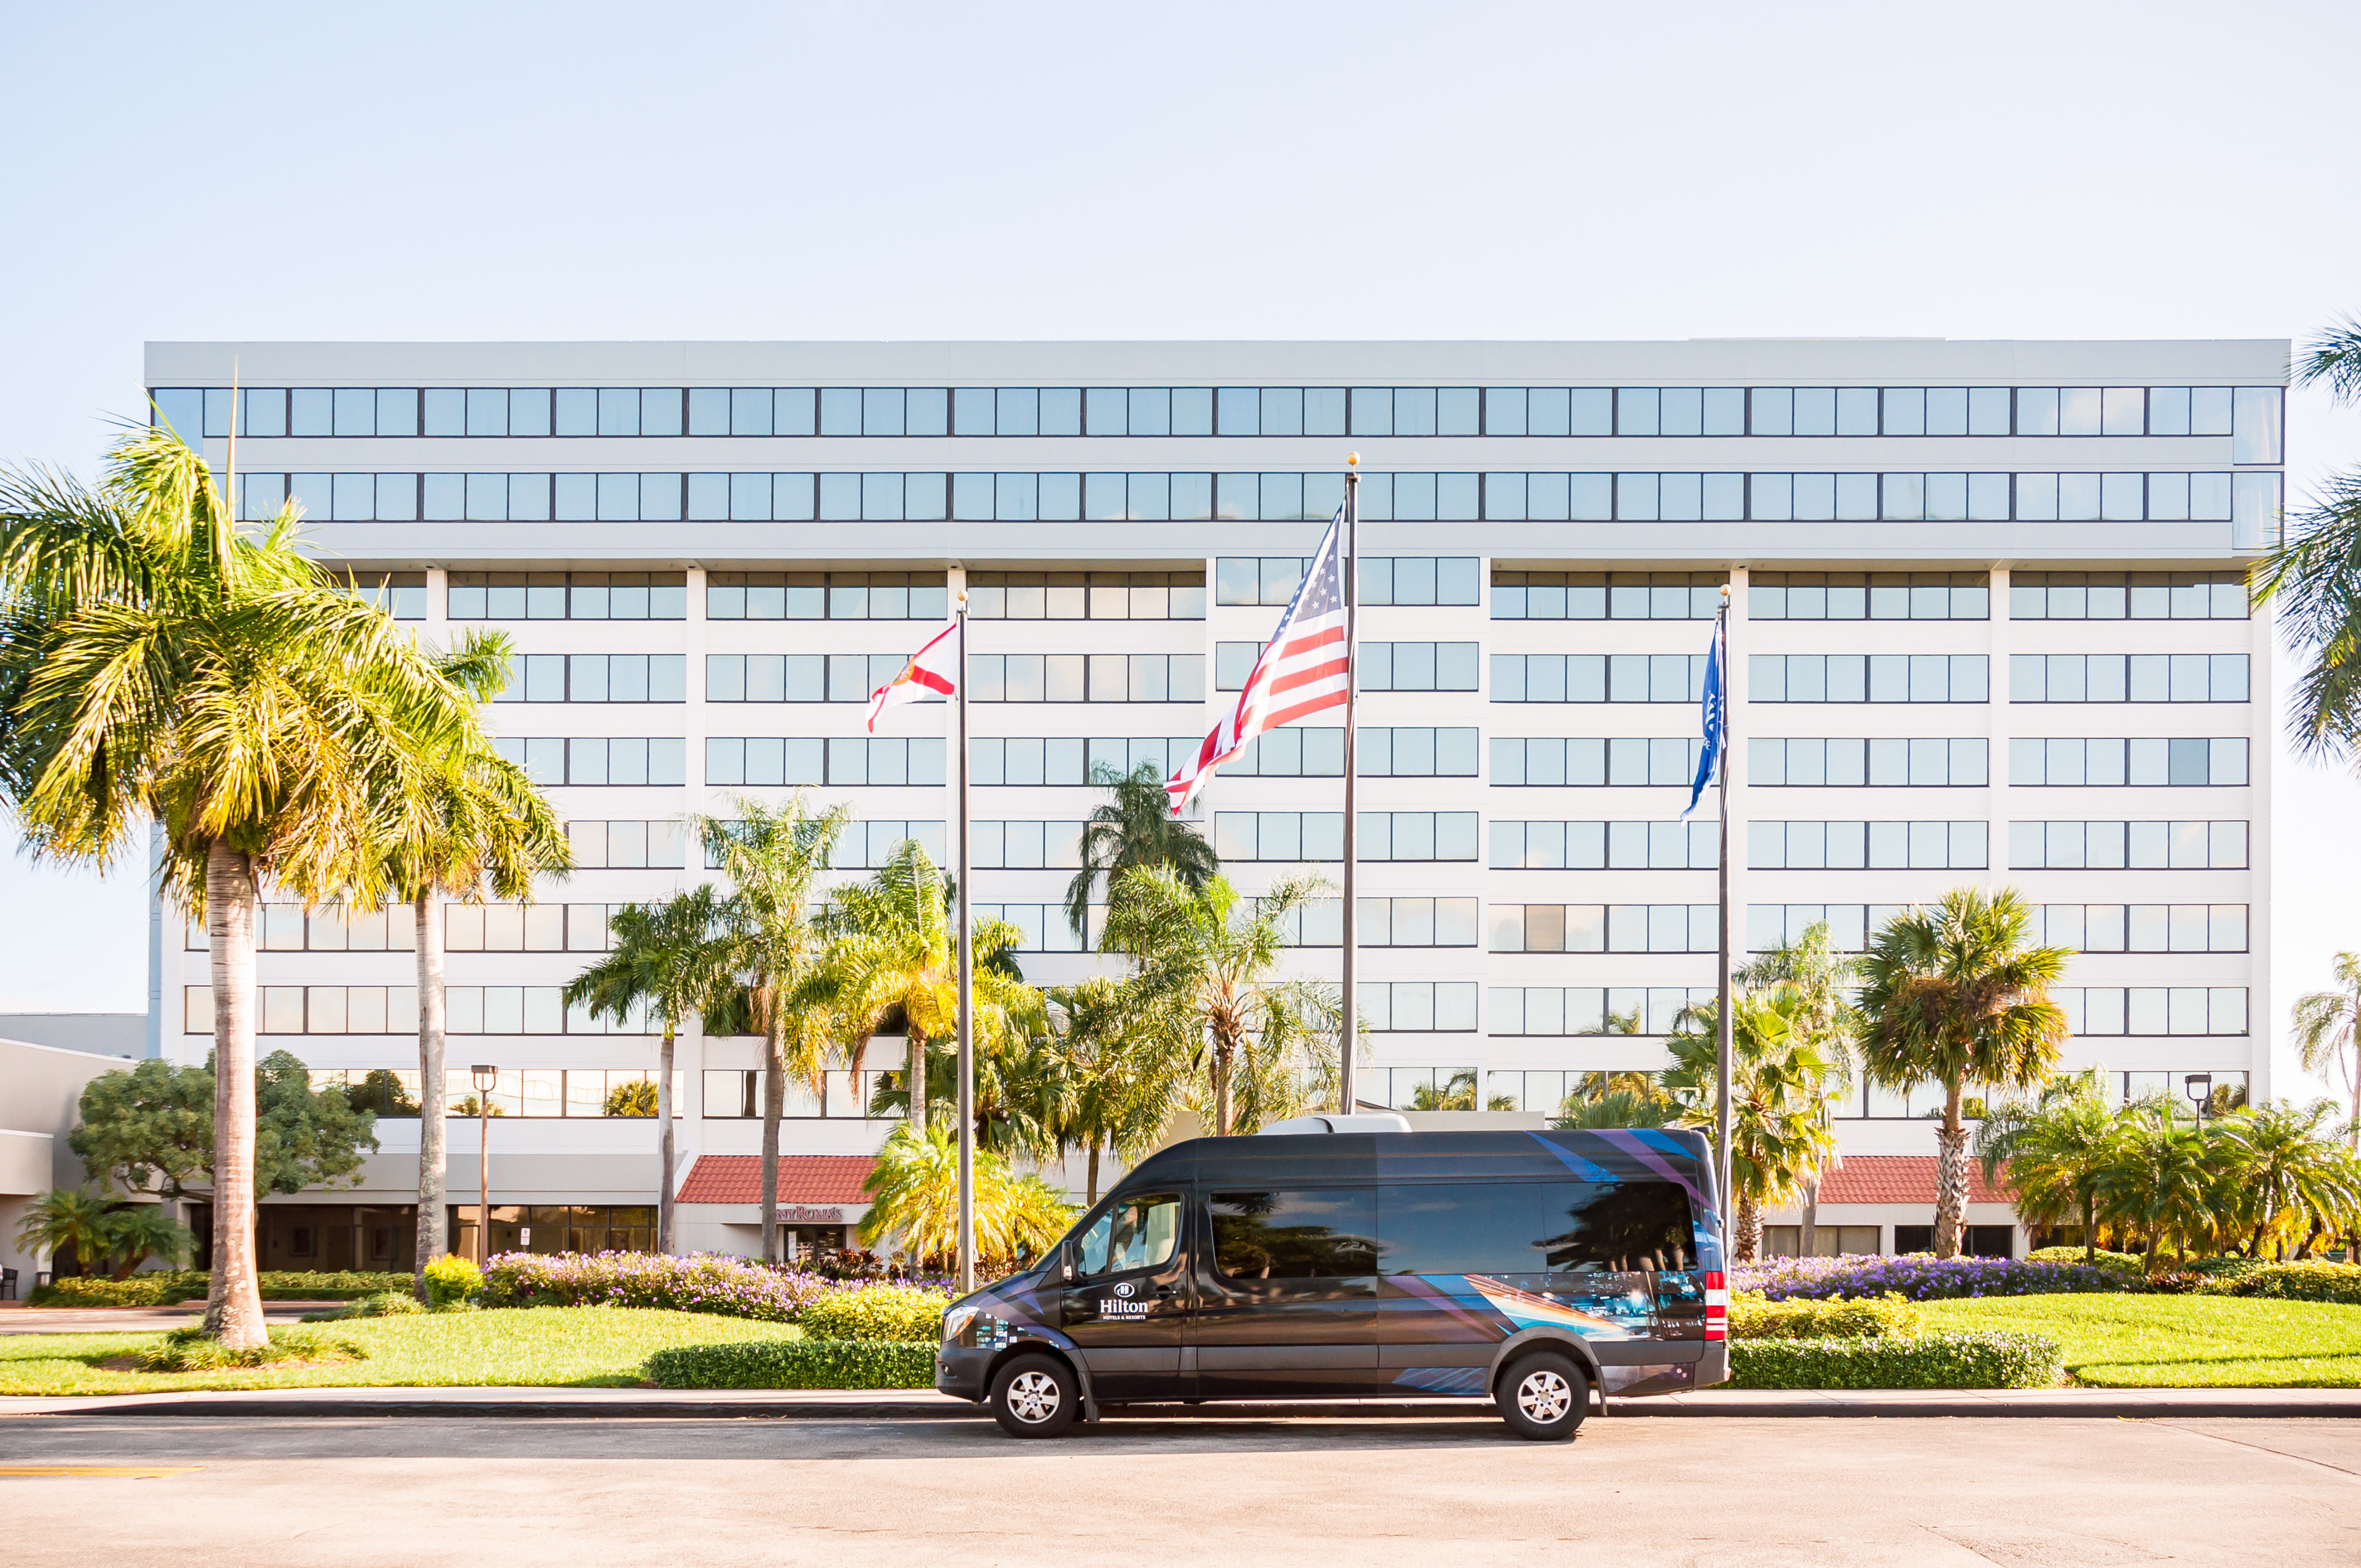 Hotel exterior with shuttle in front and flags